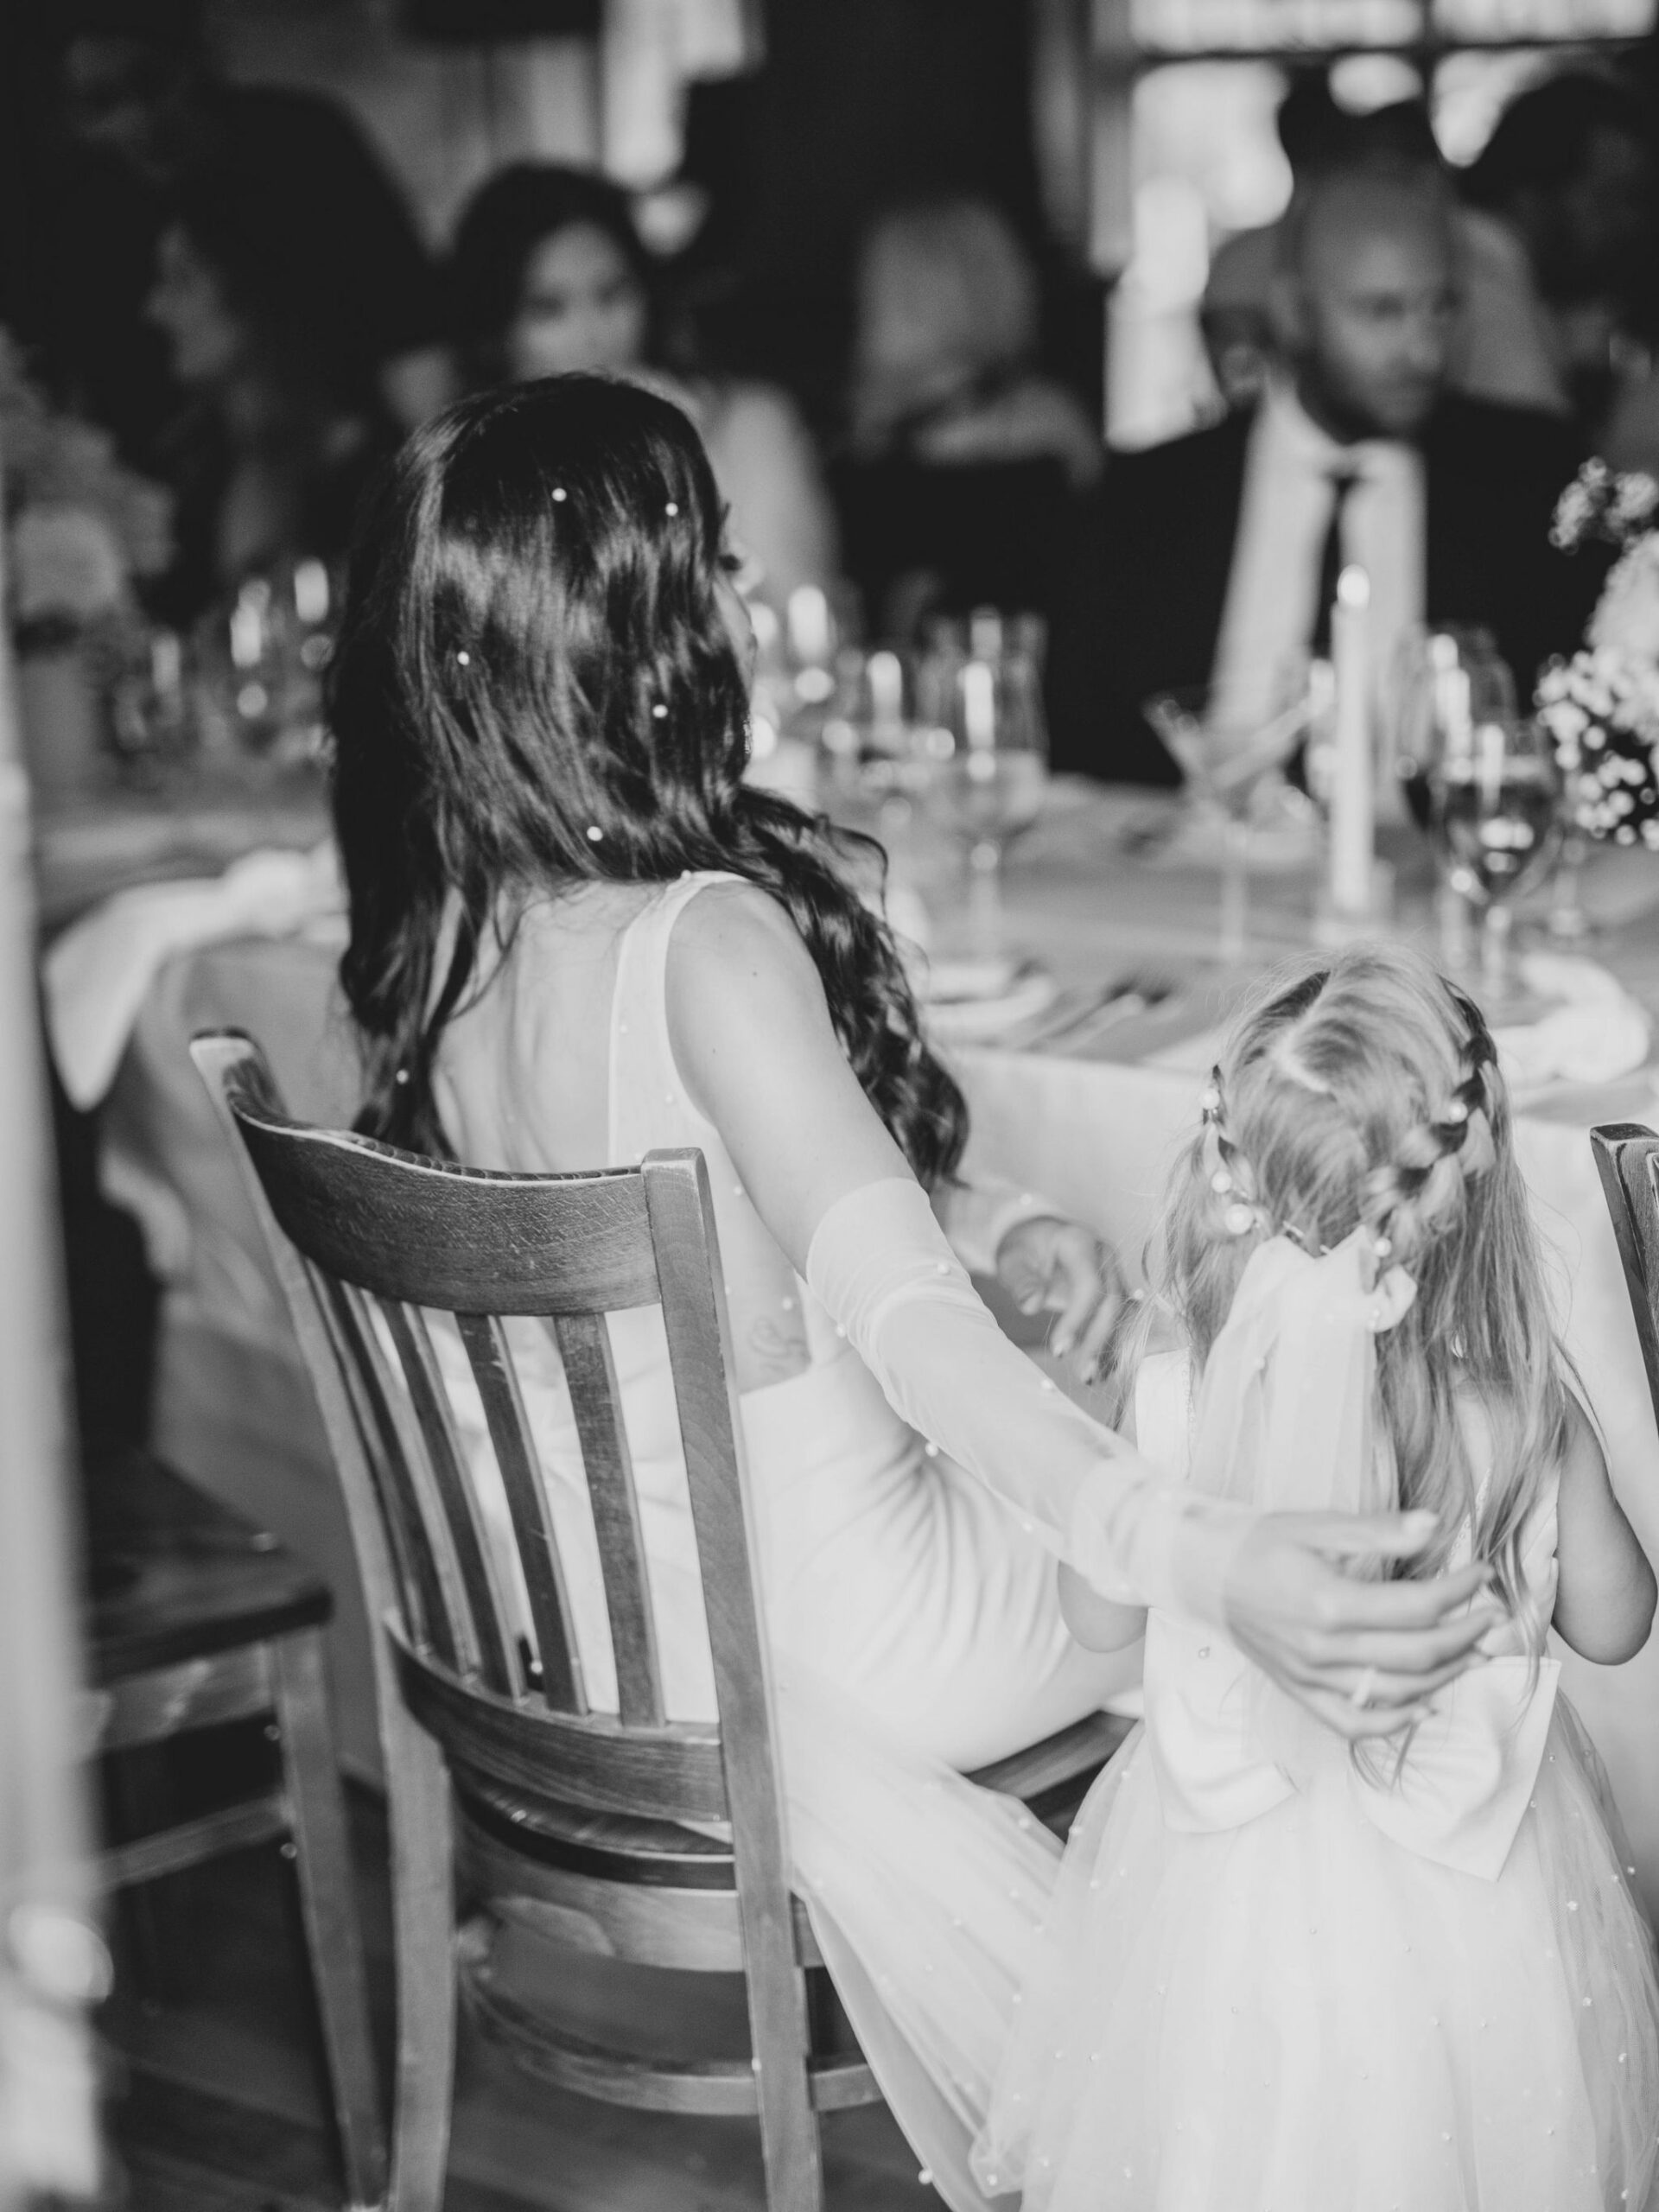 How to create a wedding guest list, bride with daughter wedding, flower girl and bride, black and white wedding reception